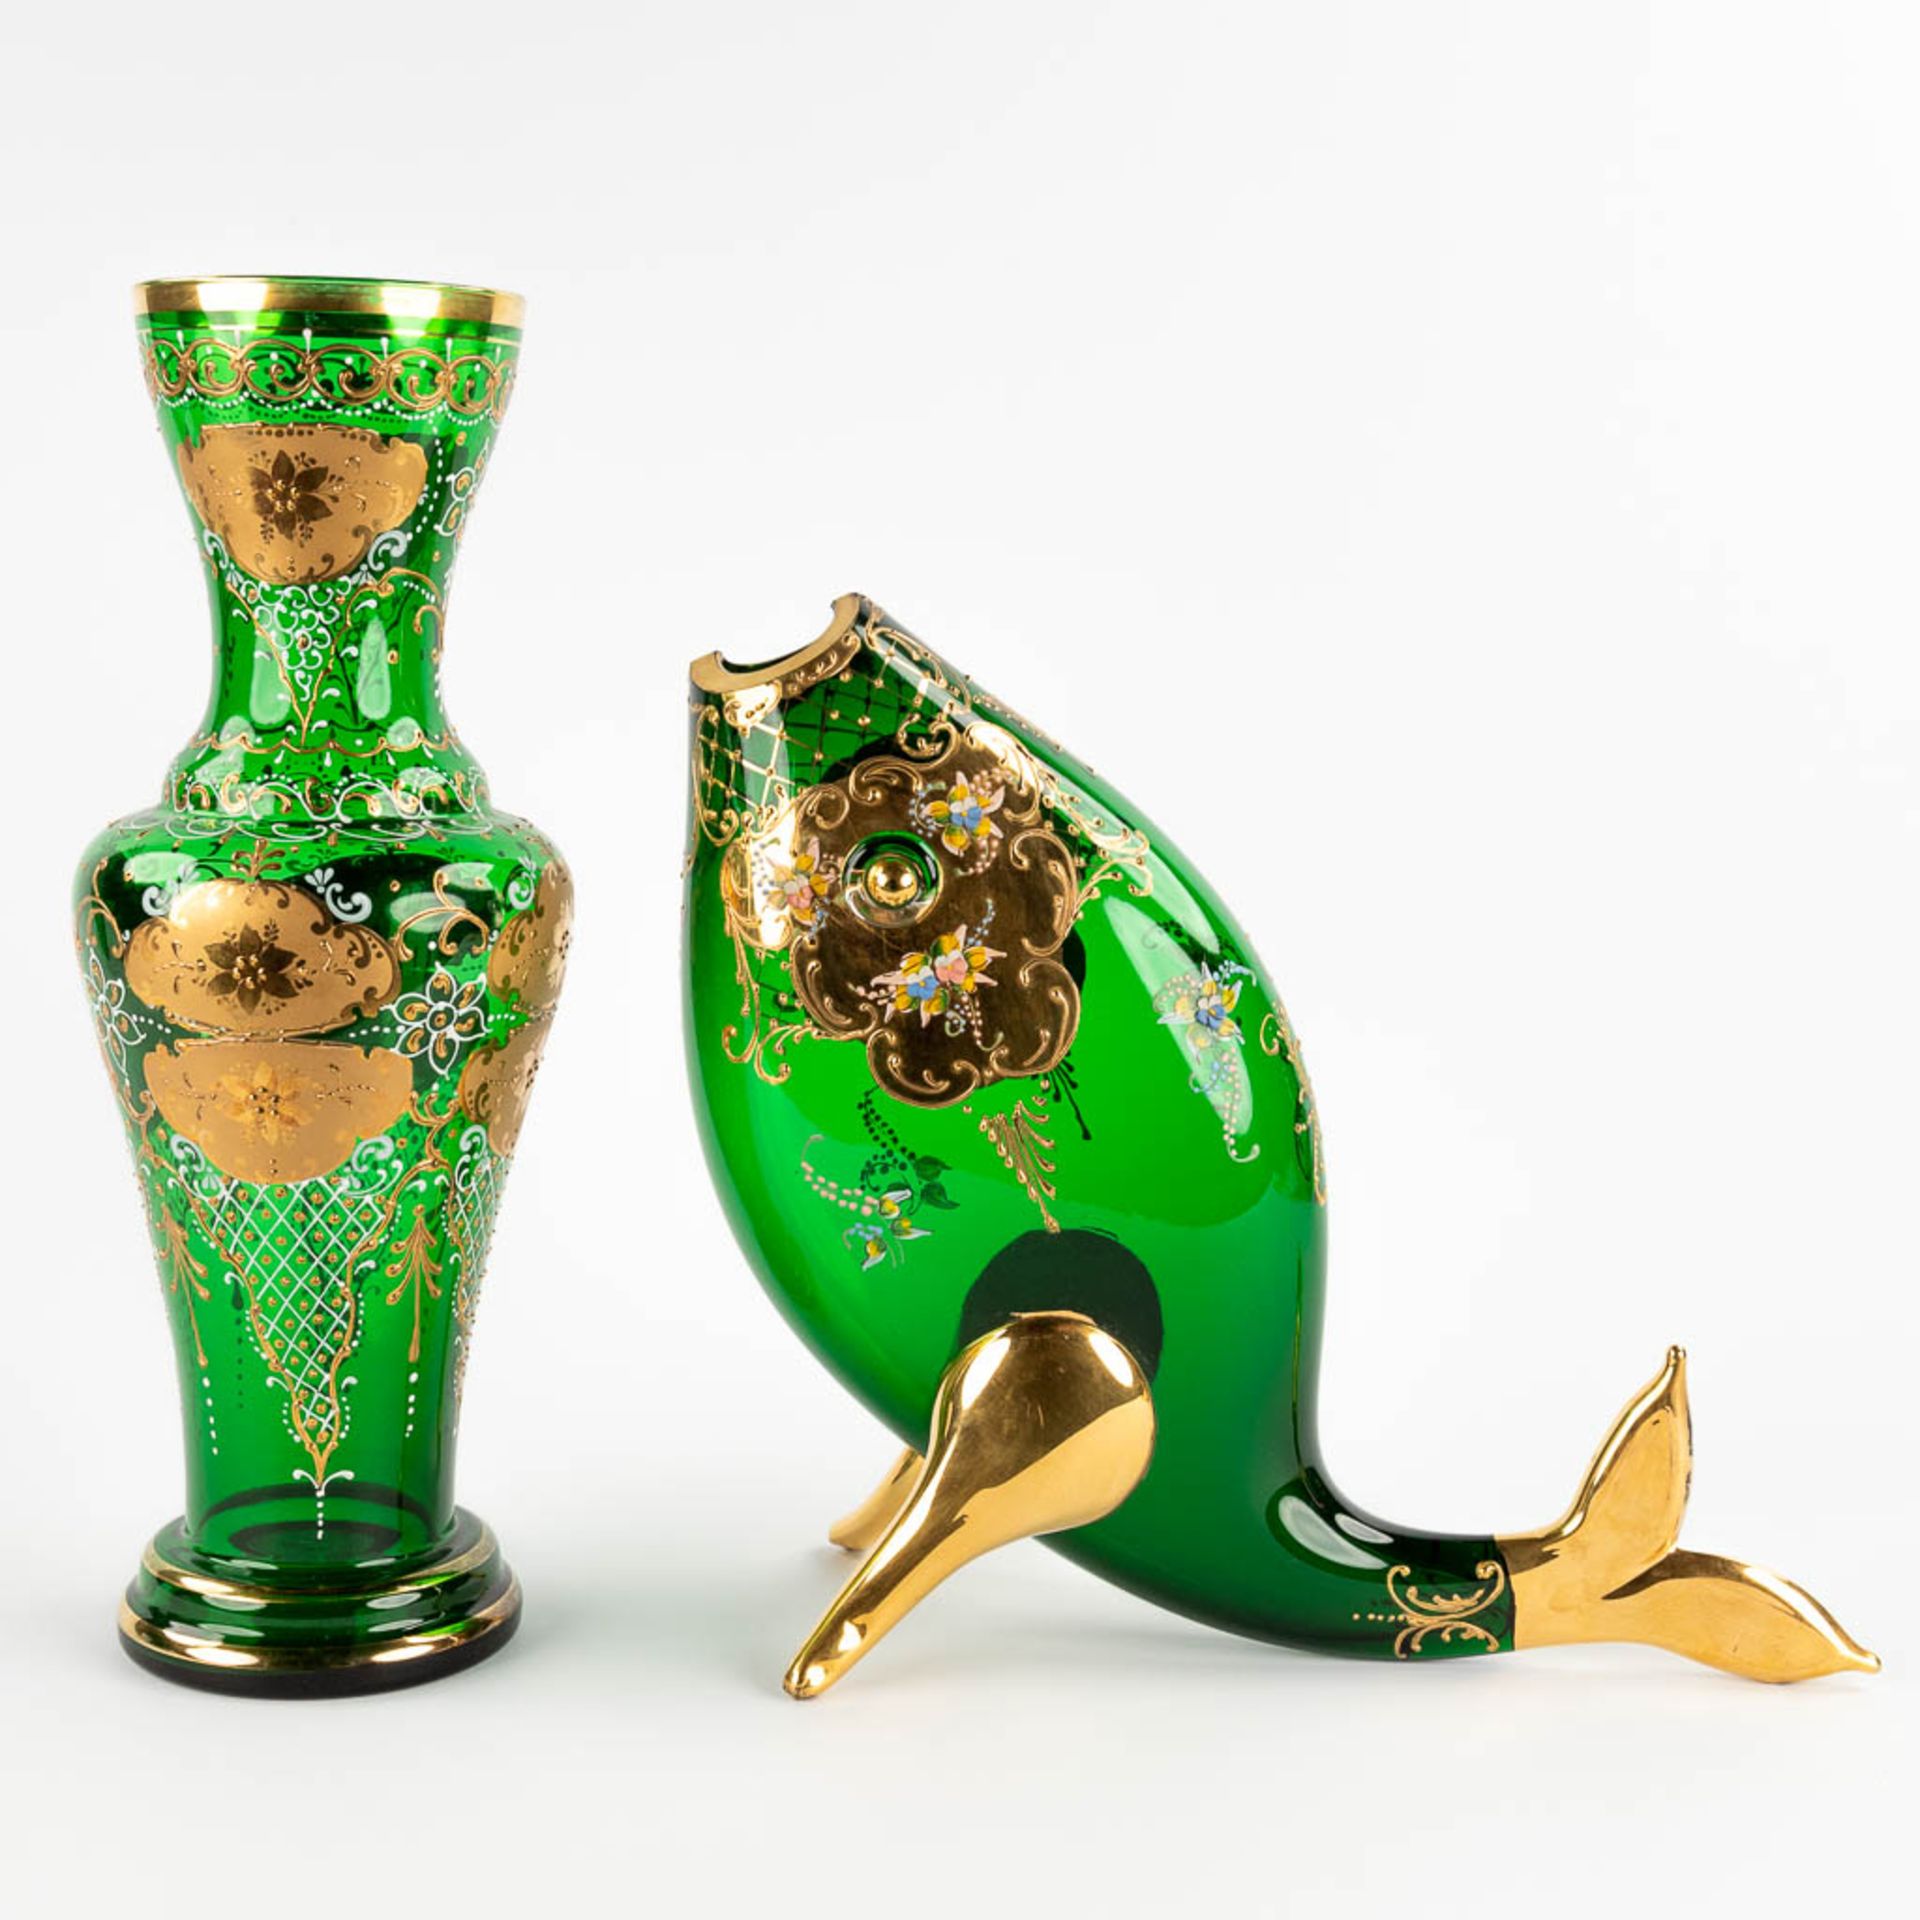 A fish and a vase, art glass, Murano, Italy. (H:44 x D:15 cm)